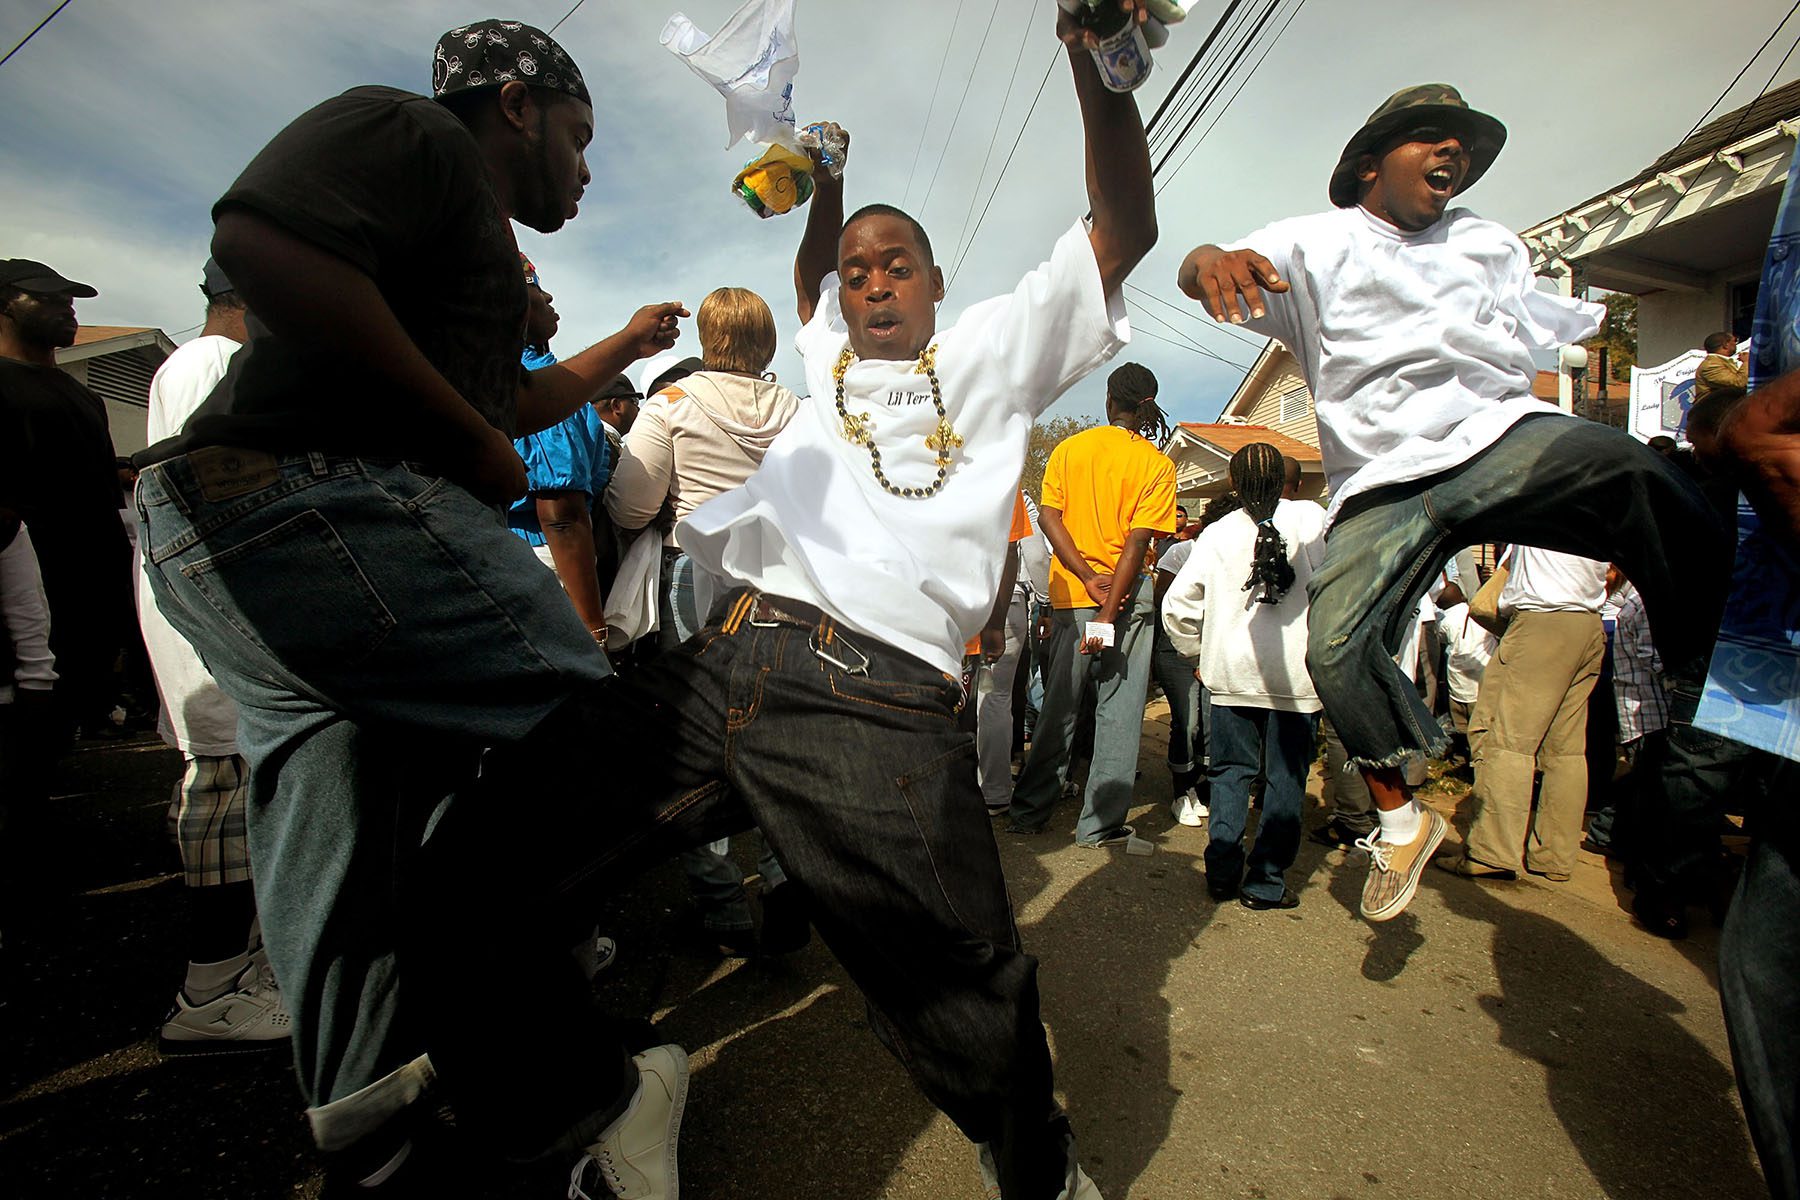 People are captured jumping up in the air mid-dance in the streets of New Orleans.